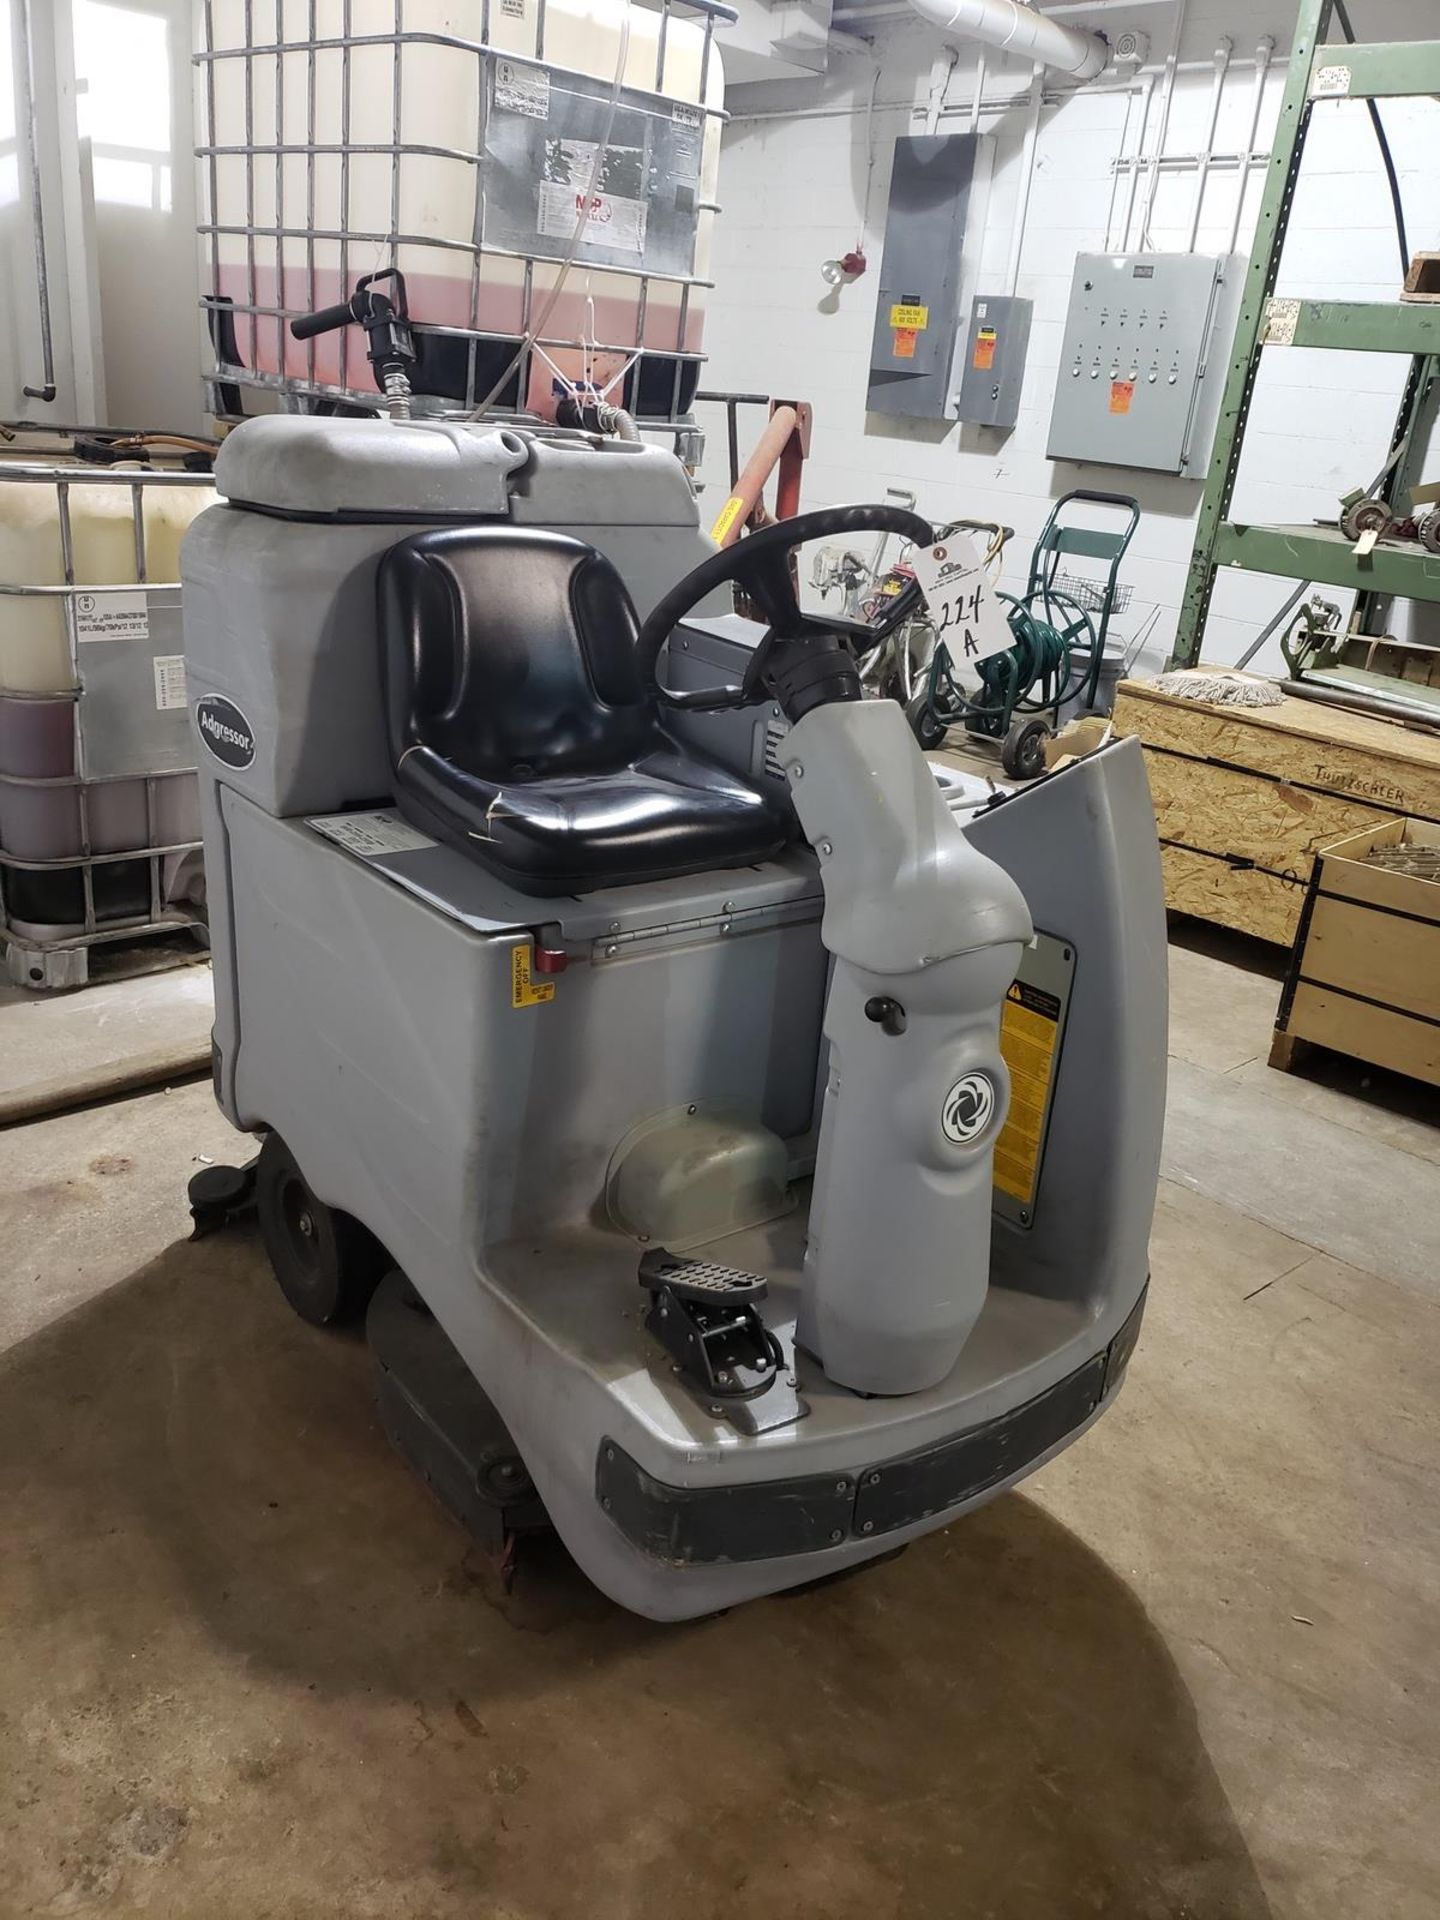 Advance Type E Power Floor Scrubber, M# Adgressor X2820D, S/N 1000038290, W/ Charger Rig Fee: $75